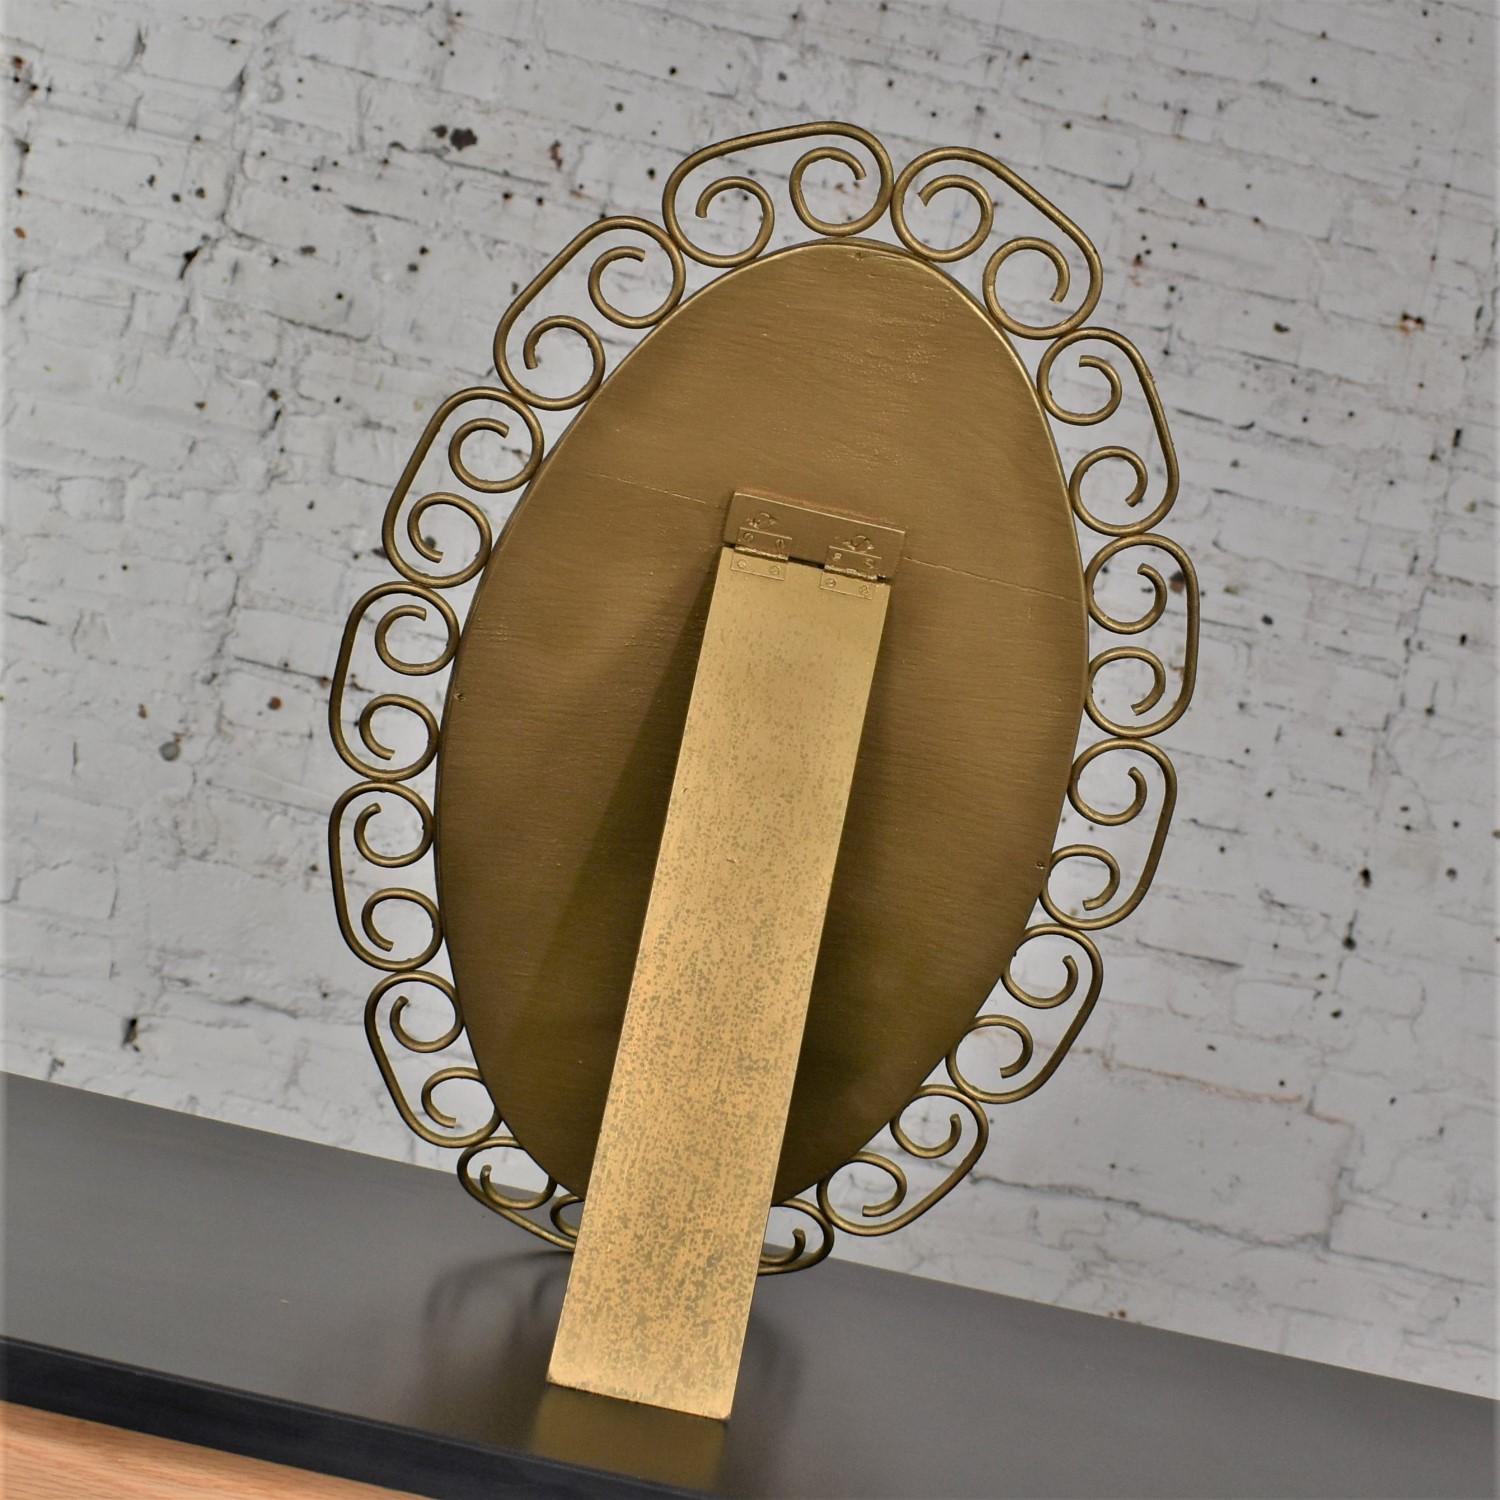 1960-1970’s Hollywood Regency Bohemian Free Standing Mirror Gold Painted Wicker  For Sale 4